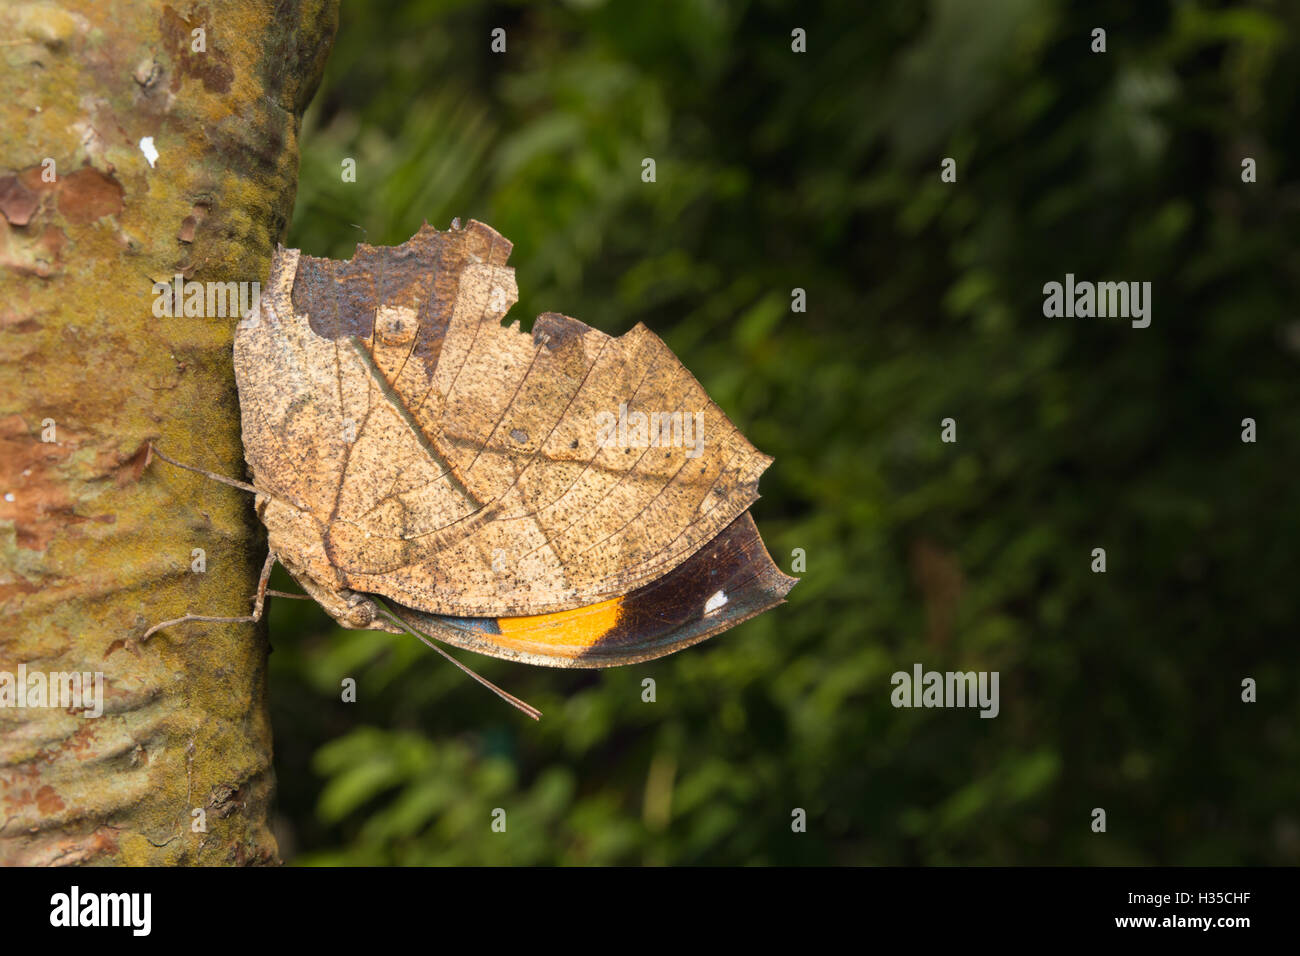 With wings closed, the leafwing butterfly bears a remarkable resemblance to a dead leaf. Stock Photo